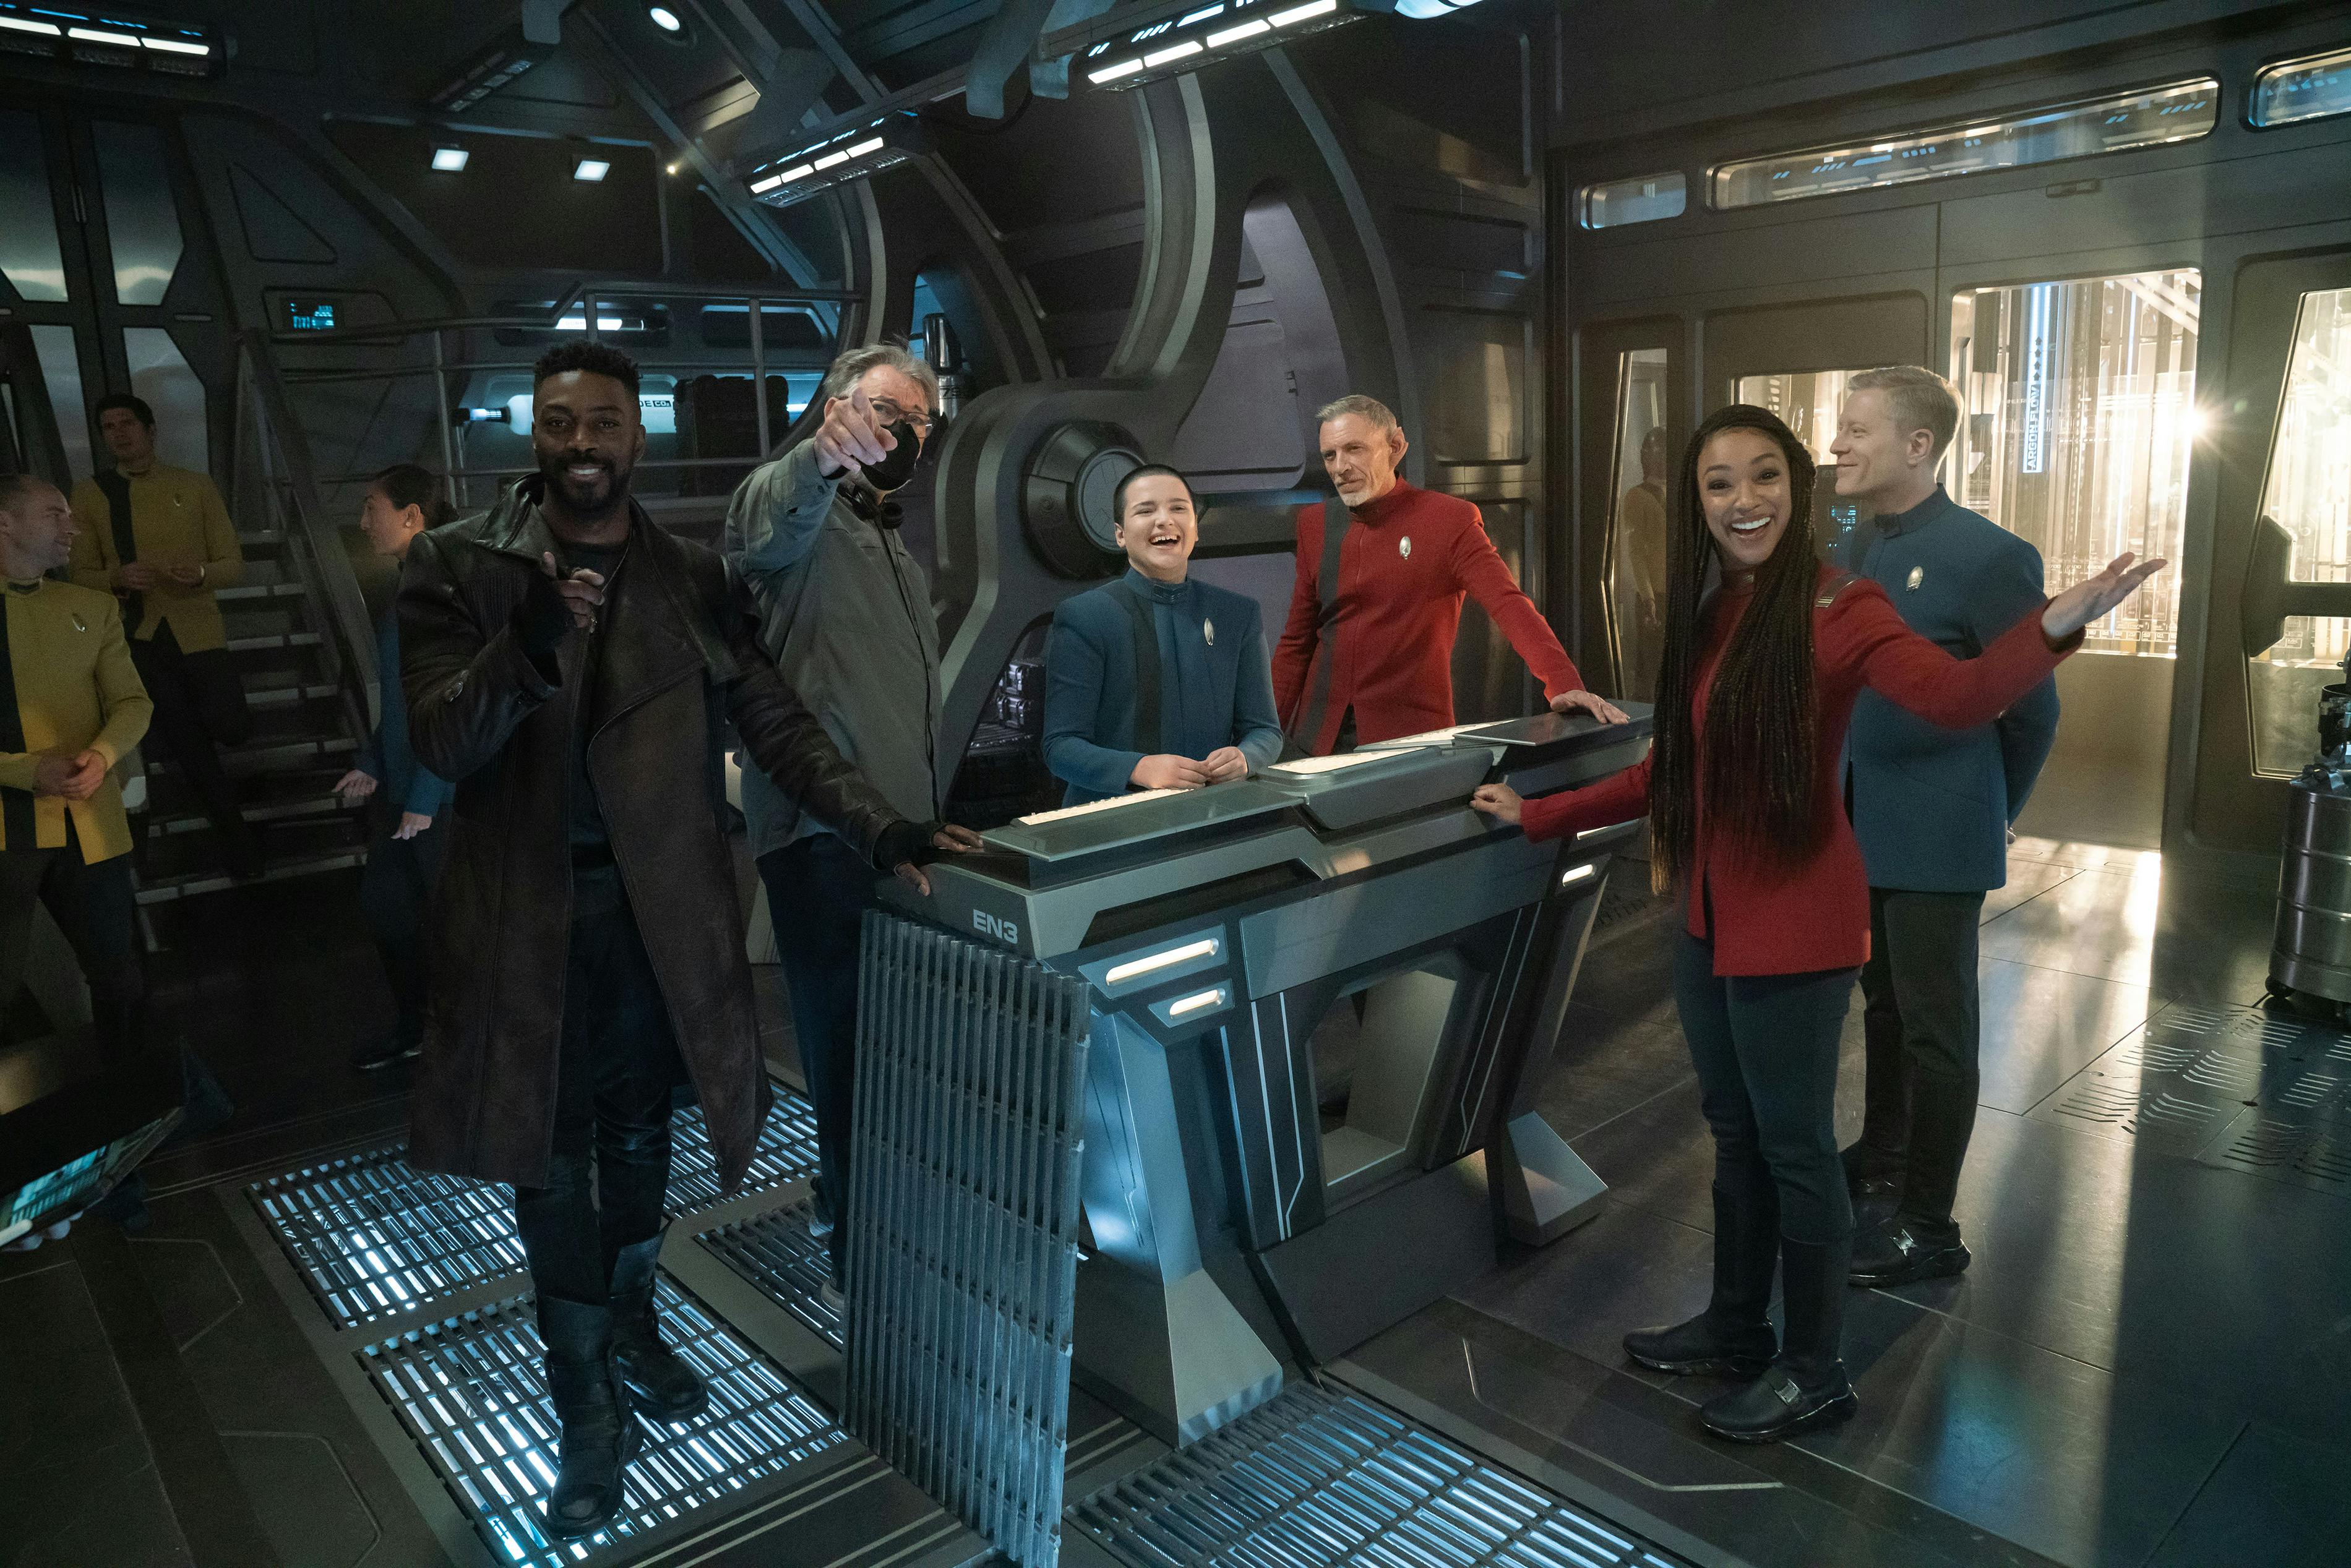 Behind-the-scenes of 'Lagrange Point' - David Ajala and Jonathan Frakes point ahead of them, Blu del Barrio laughs, Callum Keith Rennie poses, Sonequa Martin-Green smiles, while Paul Stamets smiles facing Frakes and del Barrio